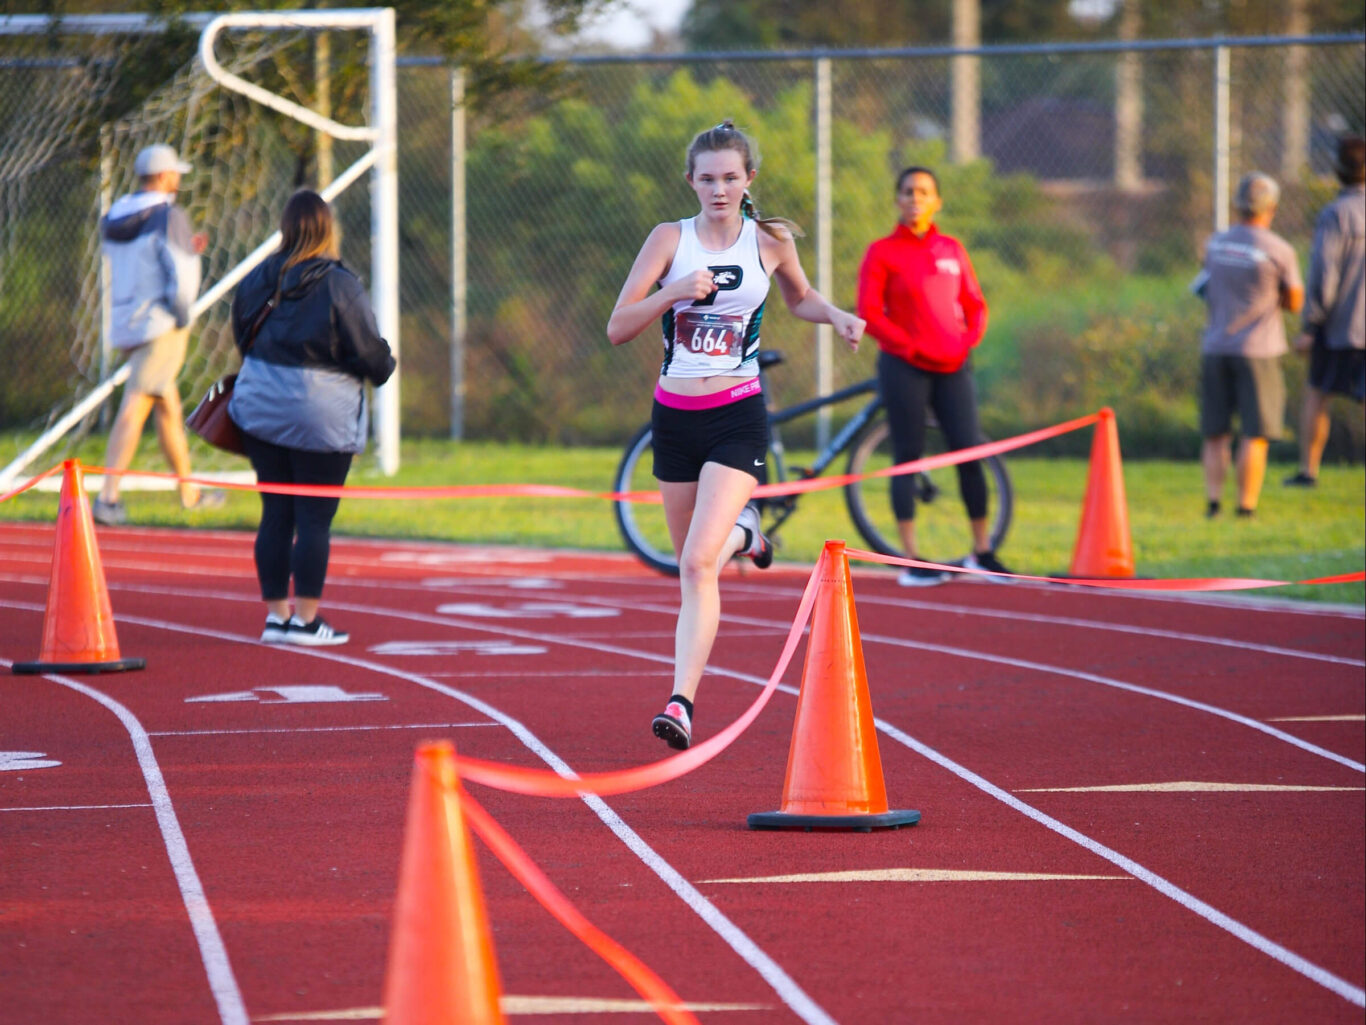 A Cross Country girl is running on a track in front of orange cones.